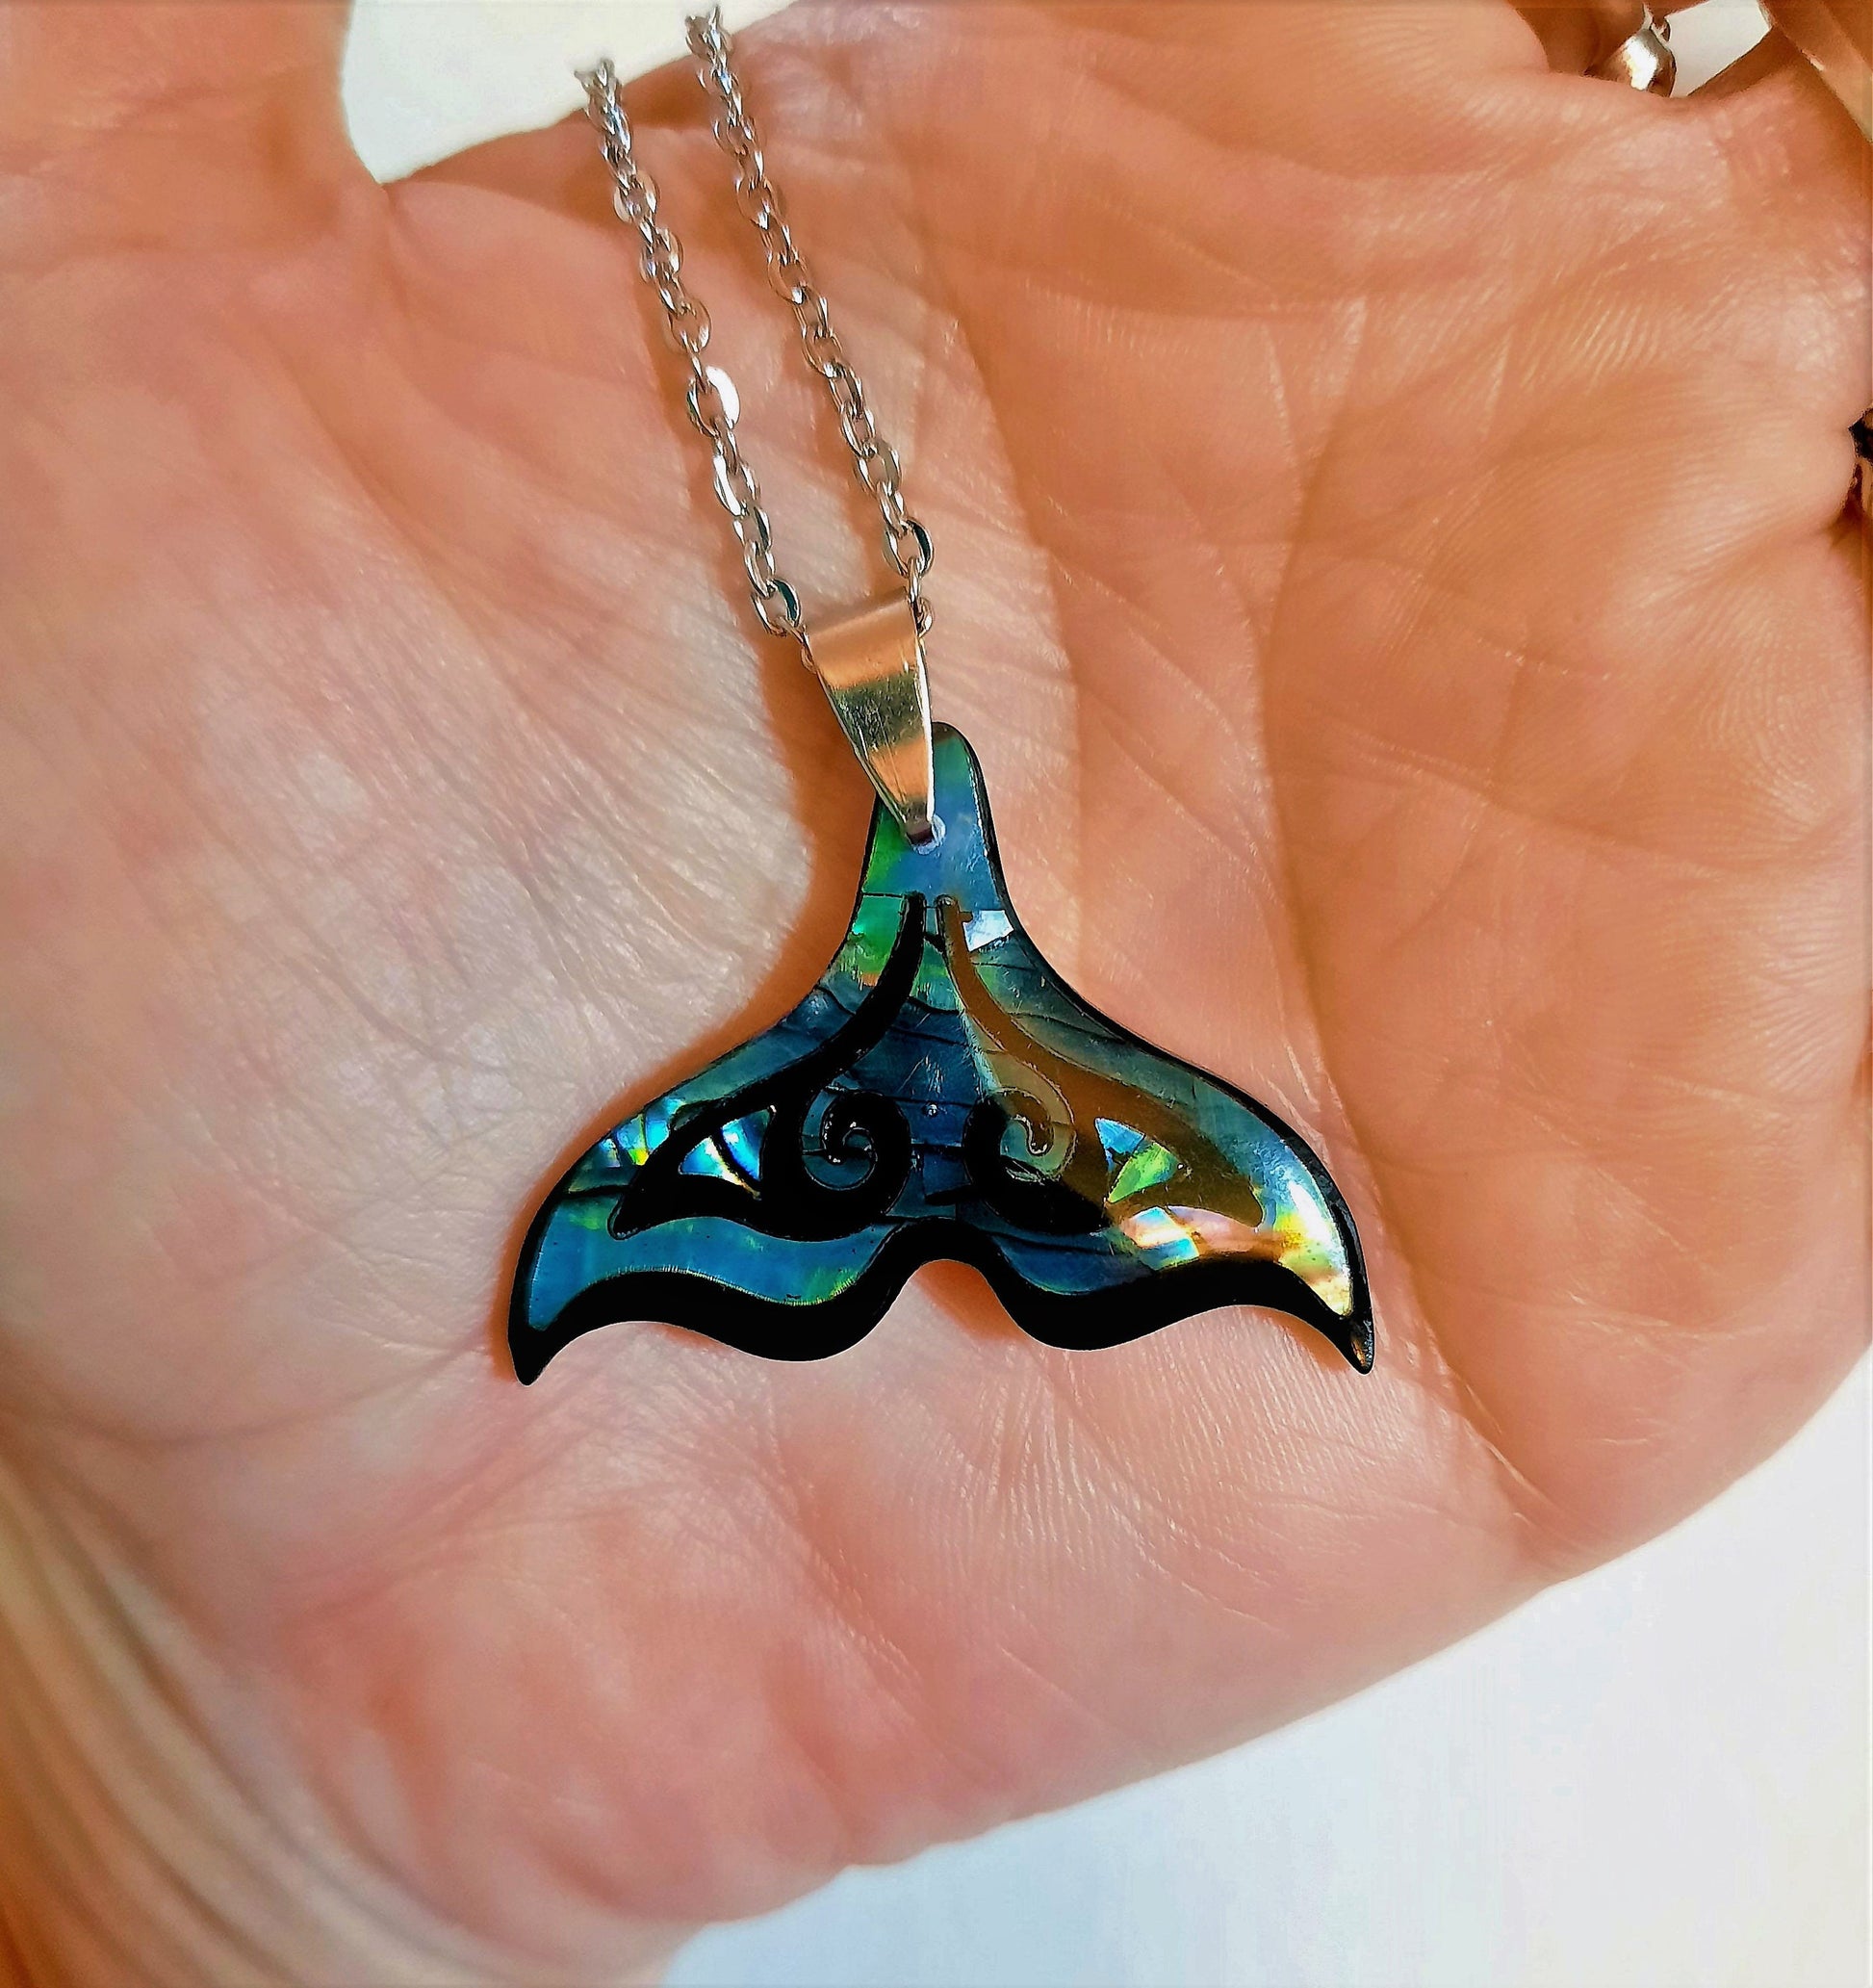 Abalone / Paua Seashell Mermaid Tail / Whale Tail Pendant Necklace - Stainless Steel - Hypoallergenic 18" Chain - Lobster Claw Closure